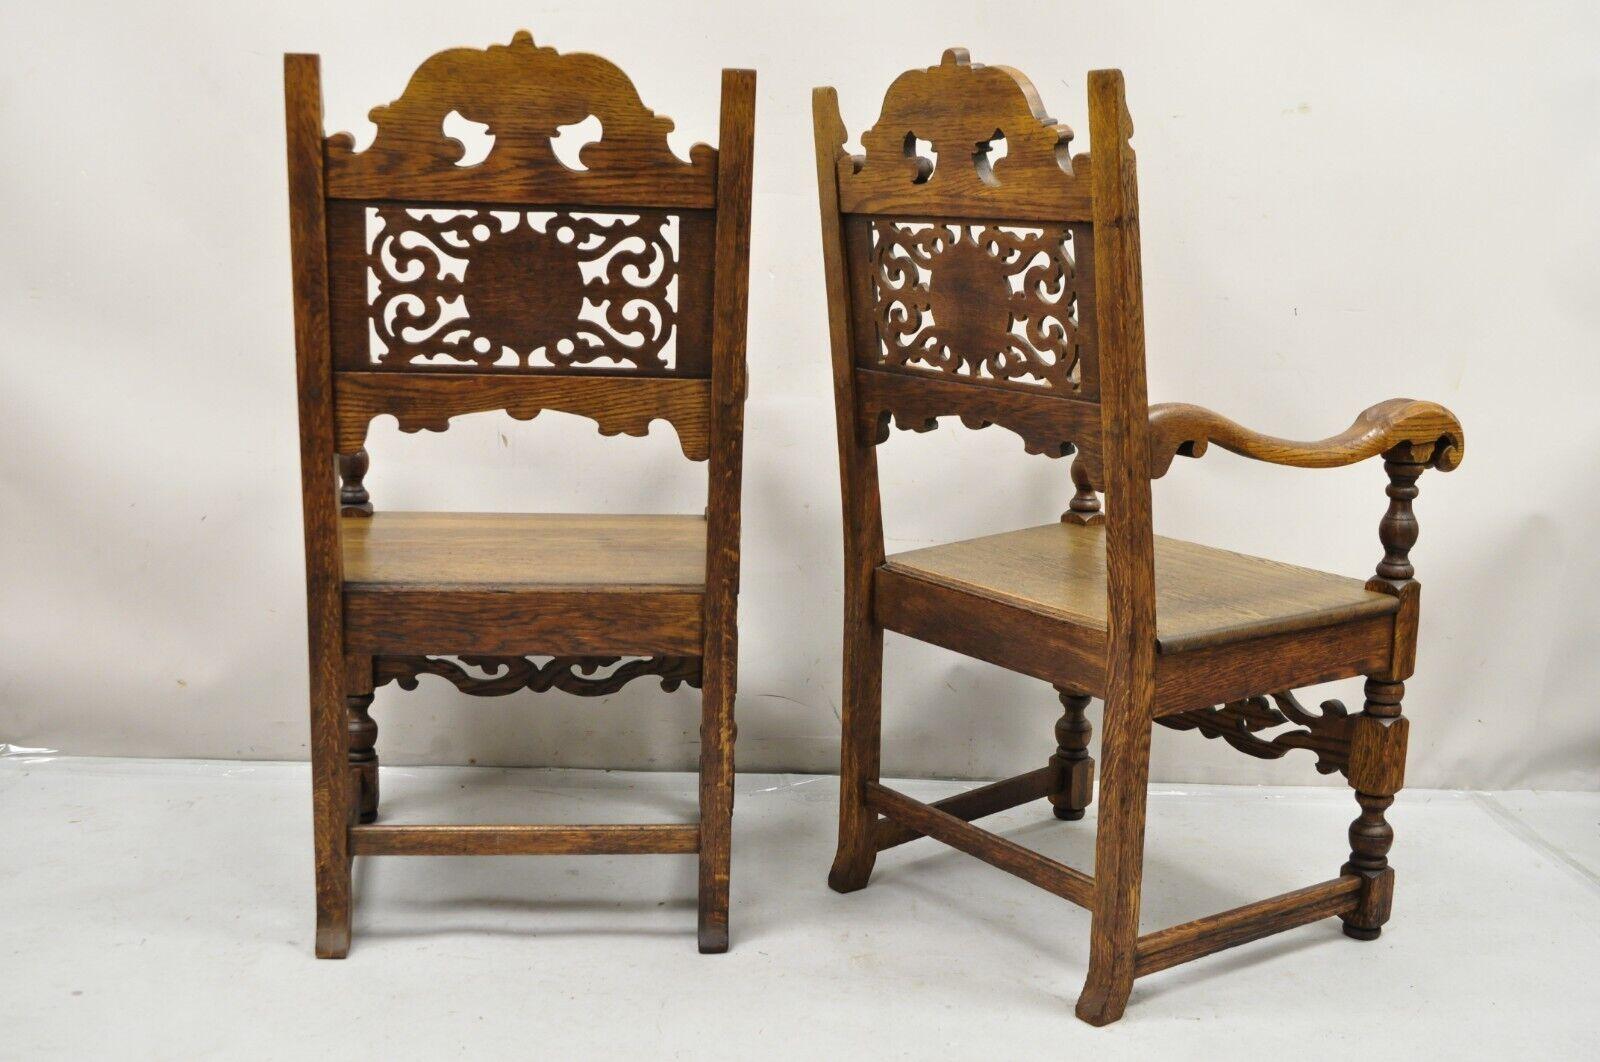 Antique Vanleigh Carved Oak Italian Renaissance Style Throne Arm Chairs - a Pair For Sale 6